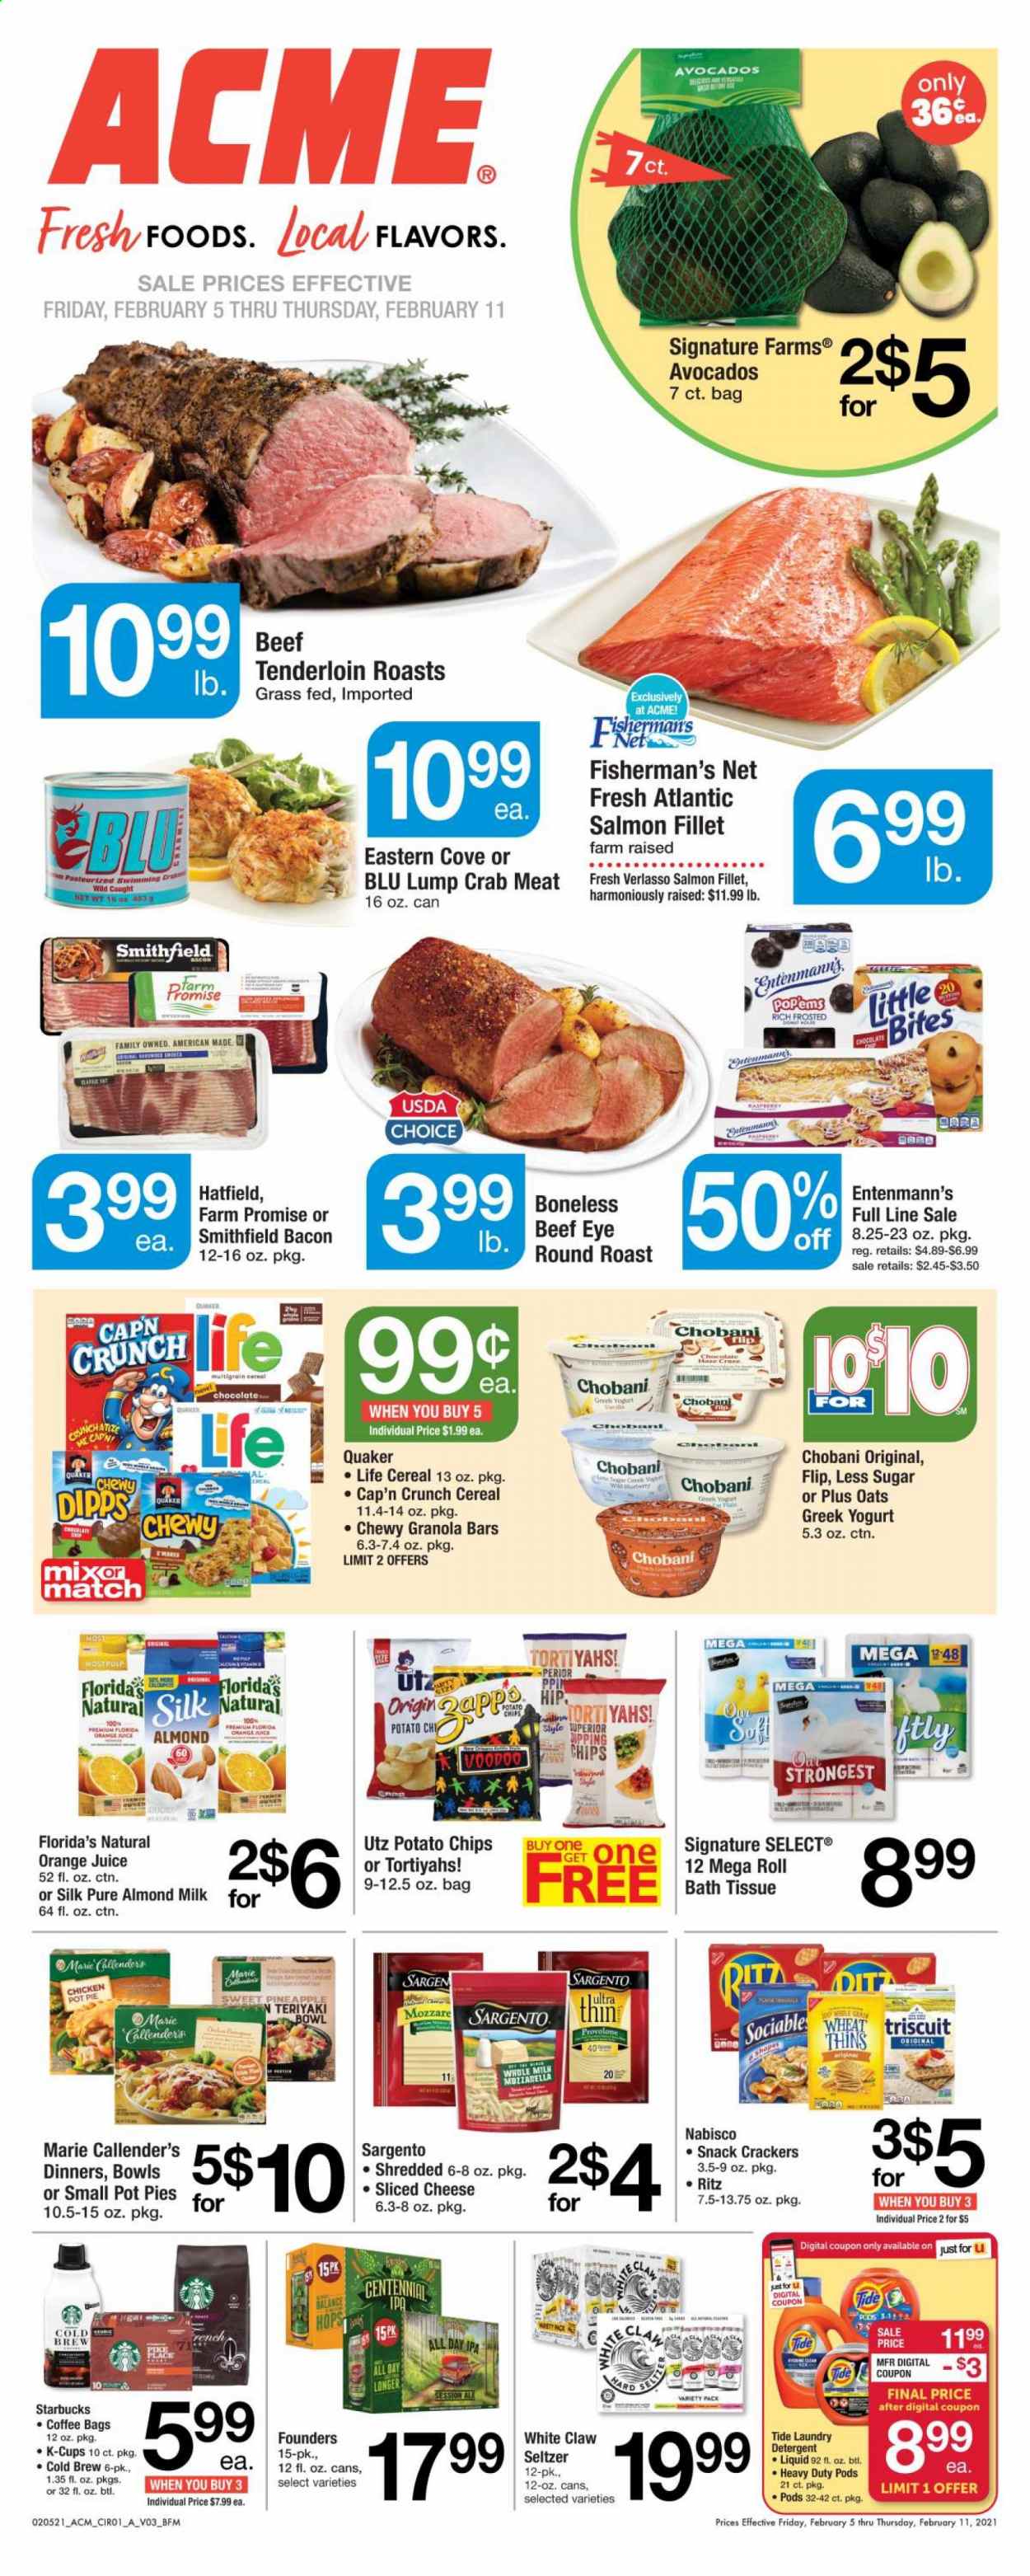 thumbnail - ACME Flyer - 02/05/2021 - 02/11/2021 - Sales products - pot pie, pie, Entenmann's, Little Bites, crab meat, salmon, salmon fillet, crab, Quaker, Marie Callender's, bacon, mozzarella, sliced cheese, cheese, Sargento, greek yoghurt, yoghurt, Chobani, almond milk, Silk, chocolate, crackers, Florida's Natural, RITZ, potato chips, chips, snack, Thins, oats, cereals, granola bar, Cap'n Crunch, teriyaki sauce, orange juice, juice, seltzer water, coffee, Starbucks, coffee capsules, K-Cups, White Claw, IPA, beef meat, round roast, bath tissue, detergent, Tide, laundry detergent, bowl, cap, bag. Page 3.